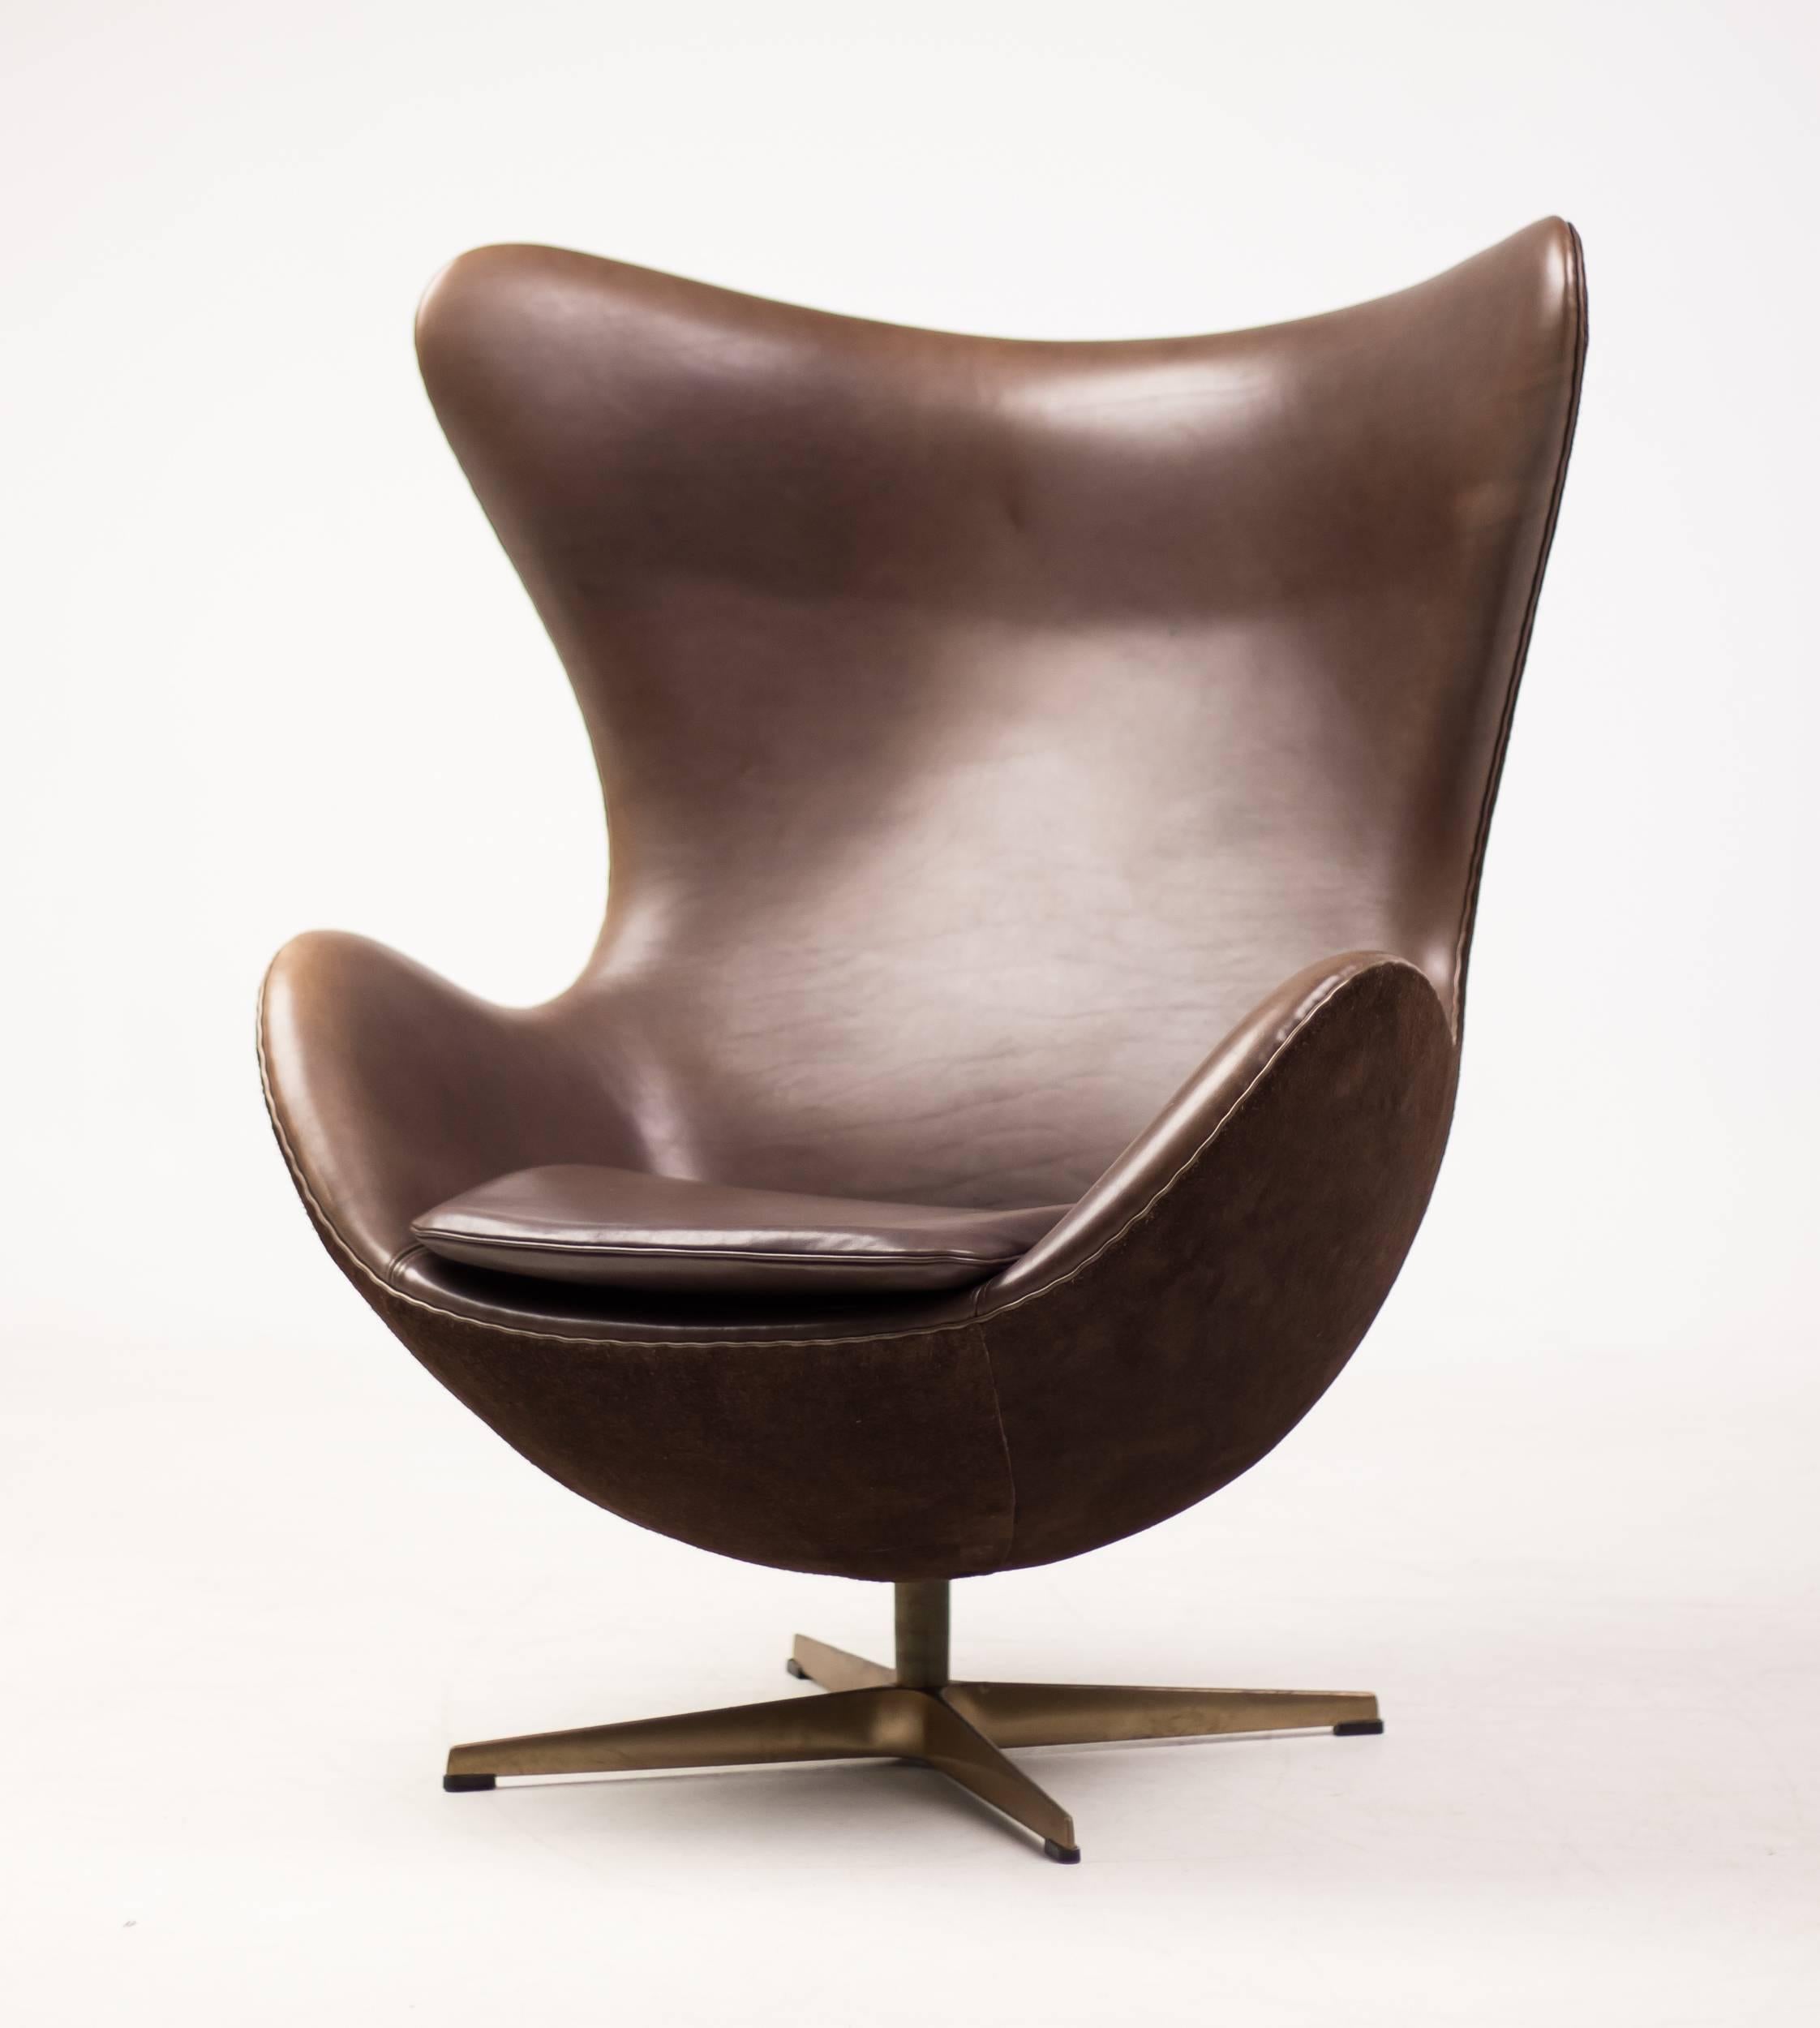 The world famous Egg Chair designed by Danish Architect Arne Jacobsen in 1958 and manufactured by Fritz Hansen was celebrated on its 50th Anniversary in 2008 with 999 limited edition examples. 

The limited edition for the first time included